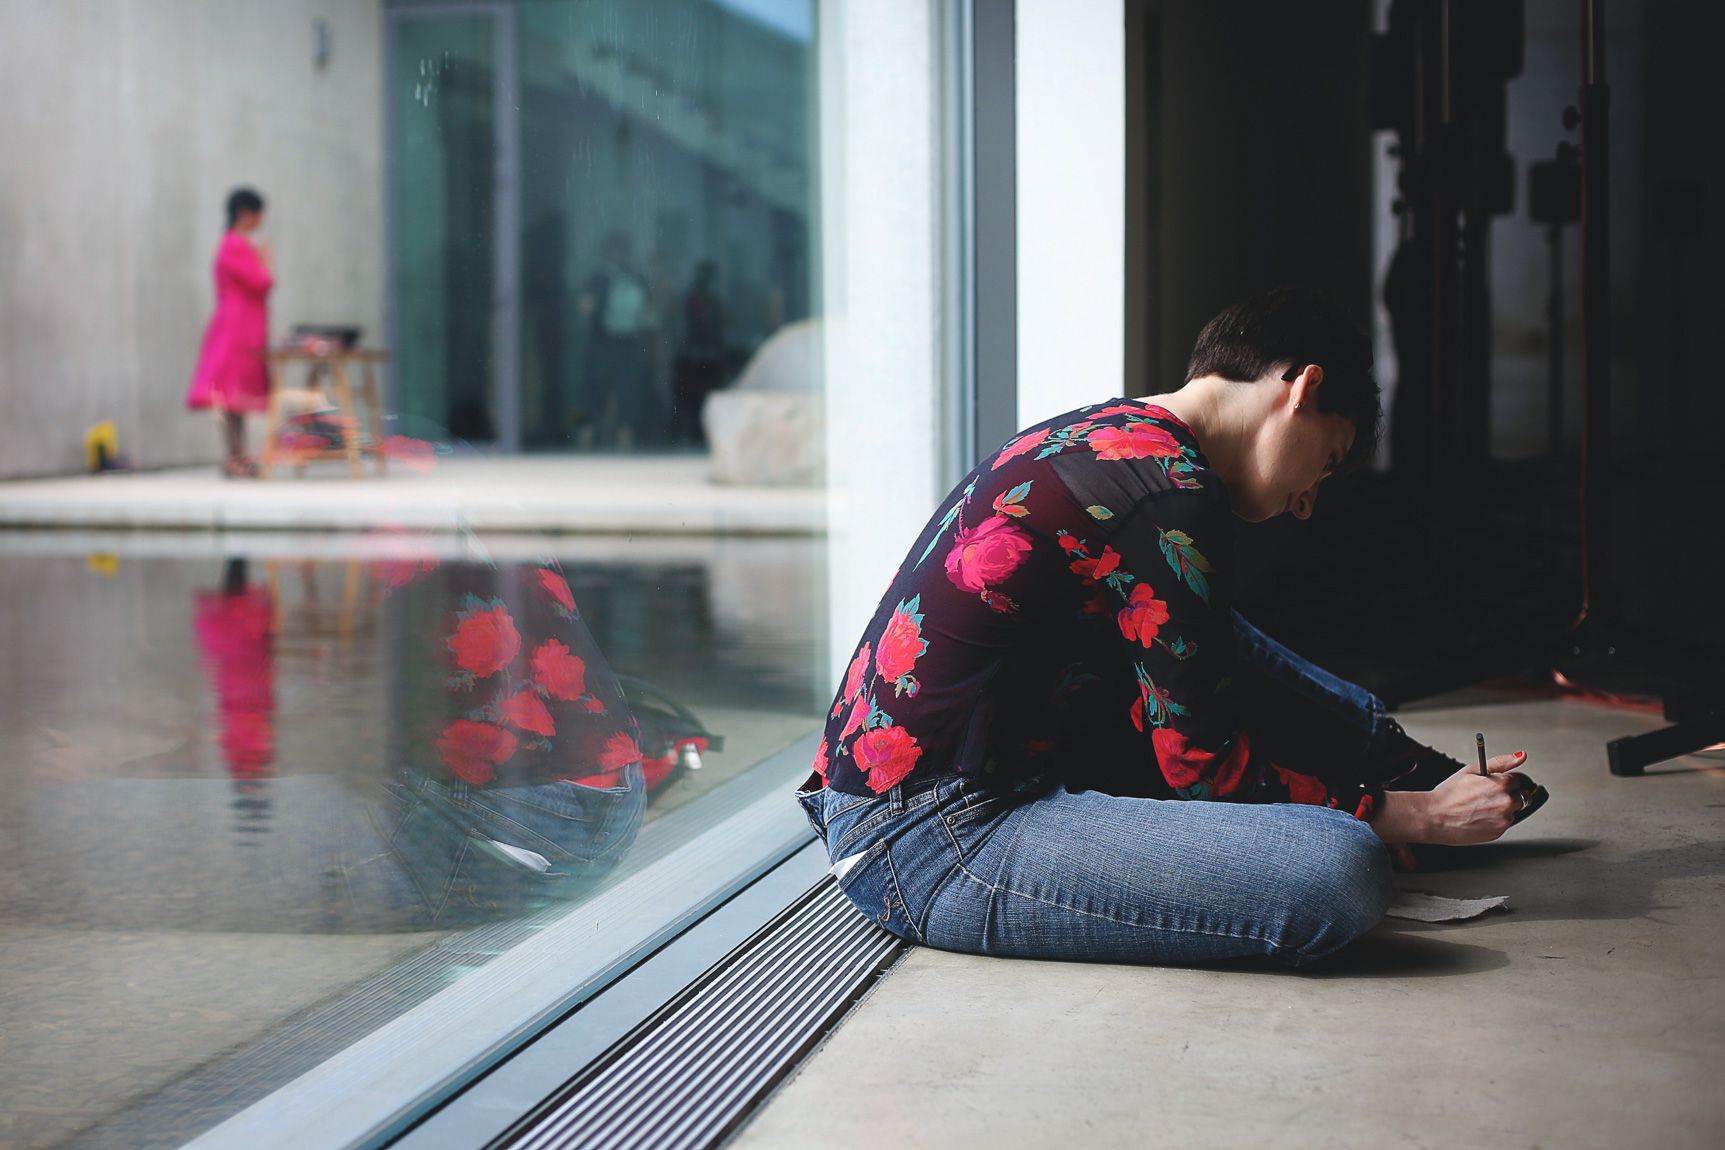 A visitor sits on the floor against a Main Gallery window adjoined with the Water Court, writing on a piece of paper.